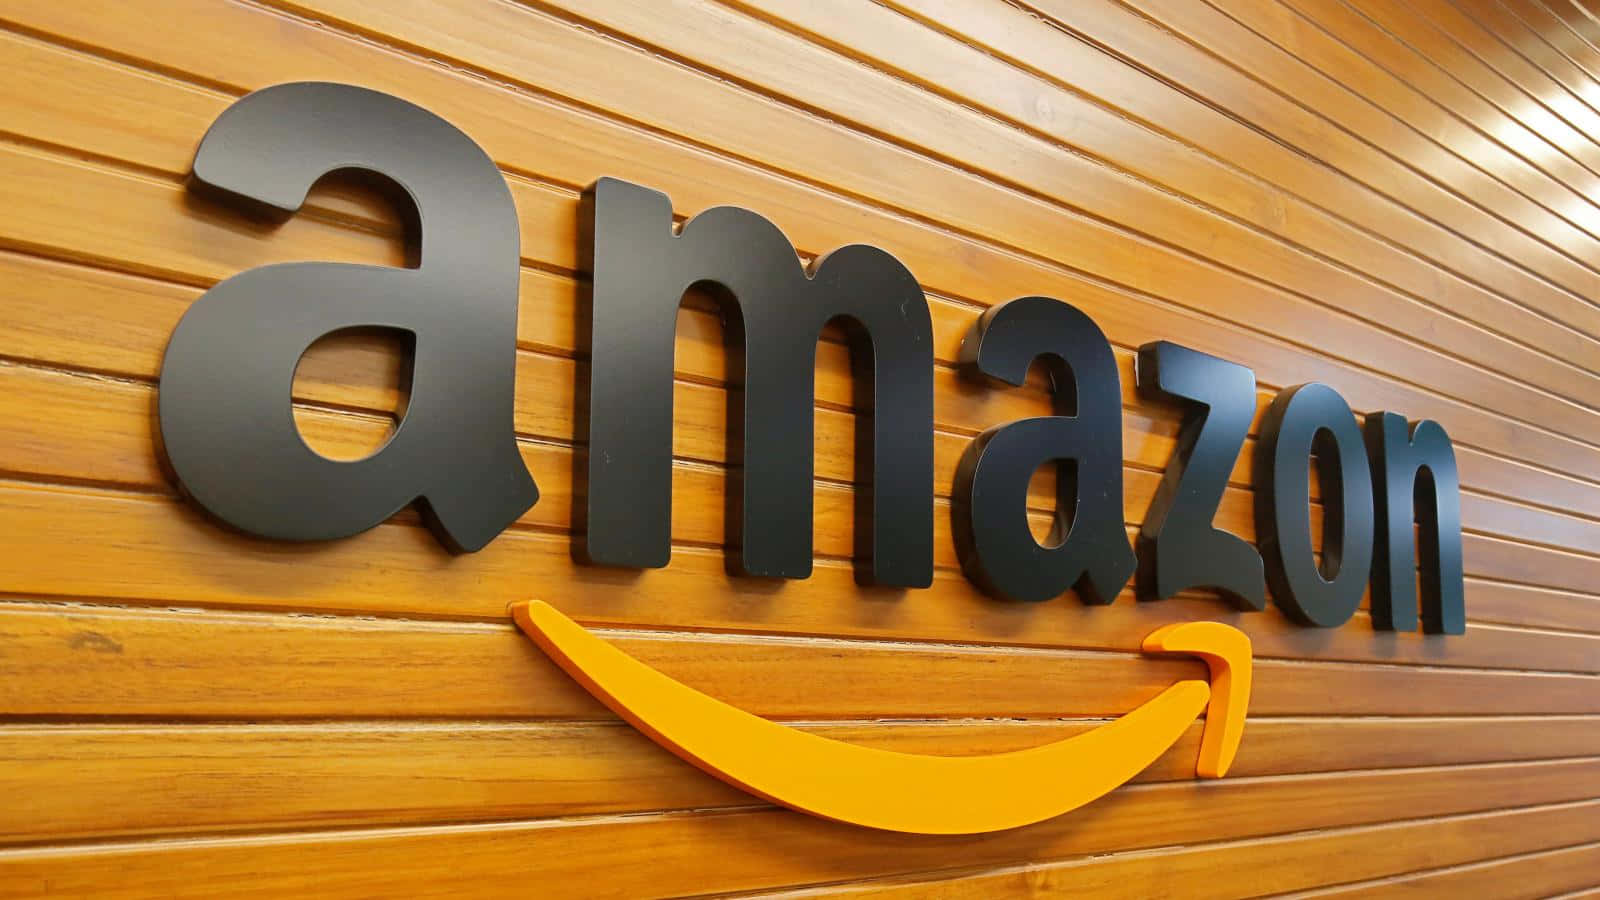 Refresh yourself with the Amazon homepage